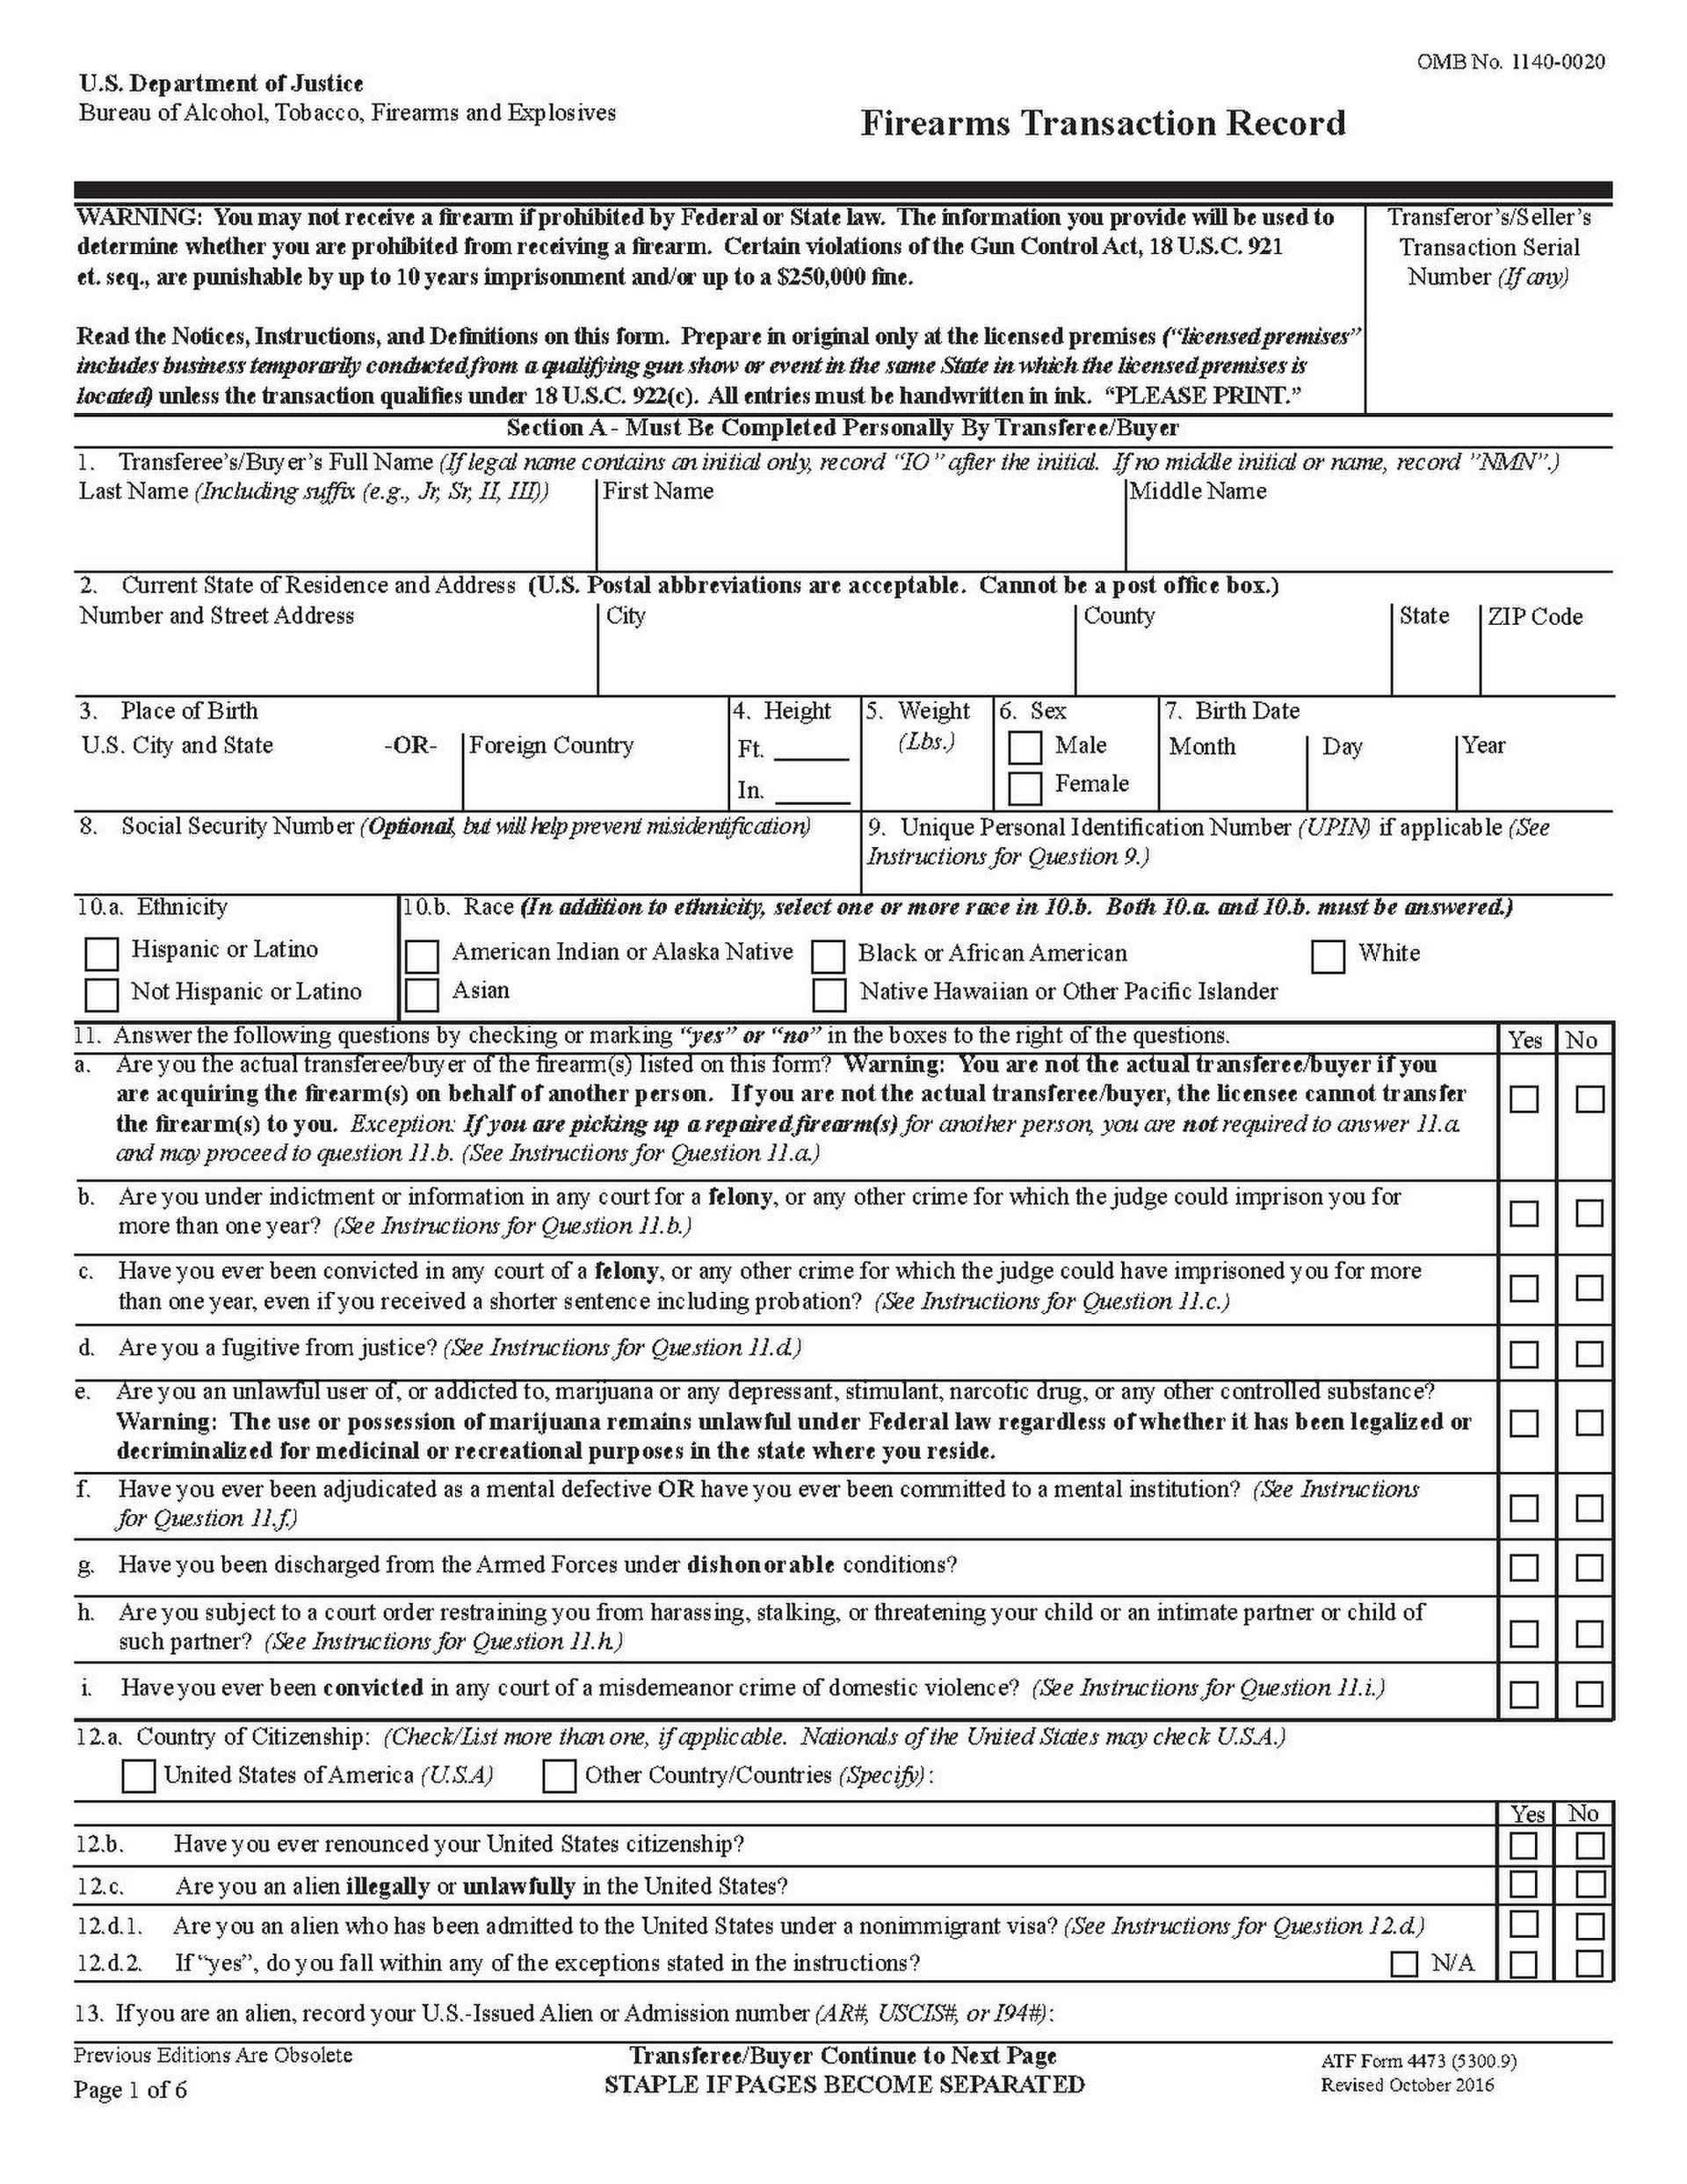 page1-1920px-Atf_form_4473-firearms_transaction_record_5300_9revised_0.pdf.jpg